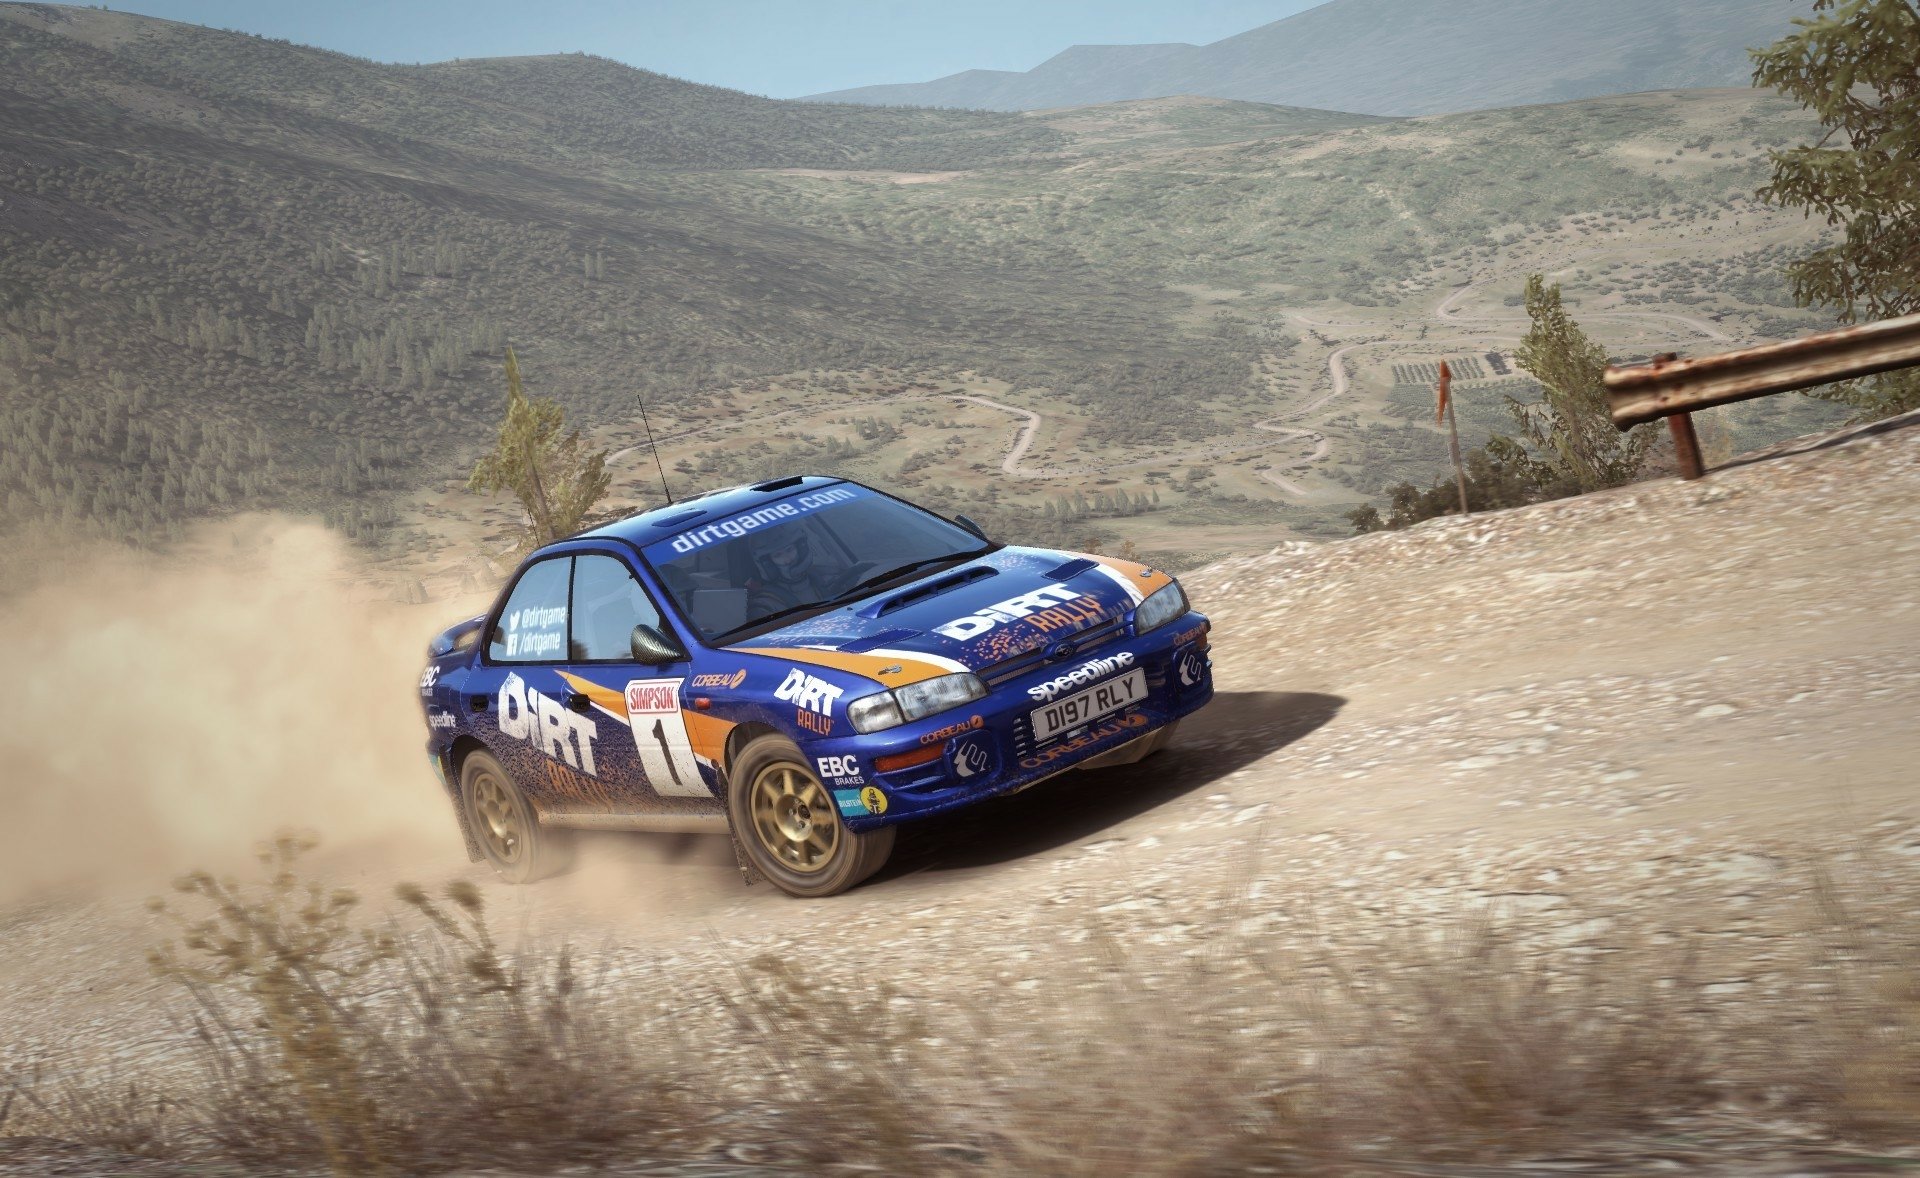 iphone xs max dirt rally background